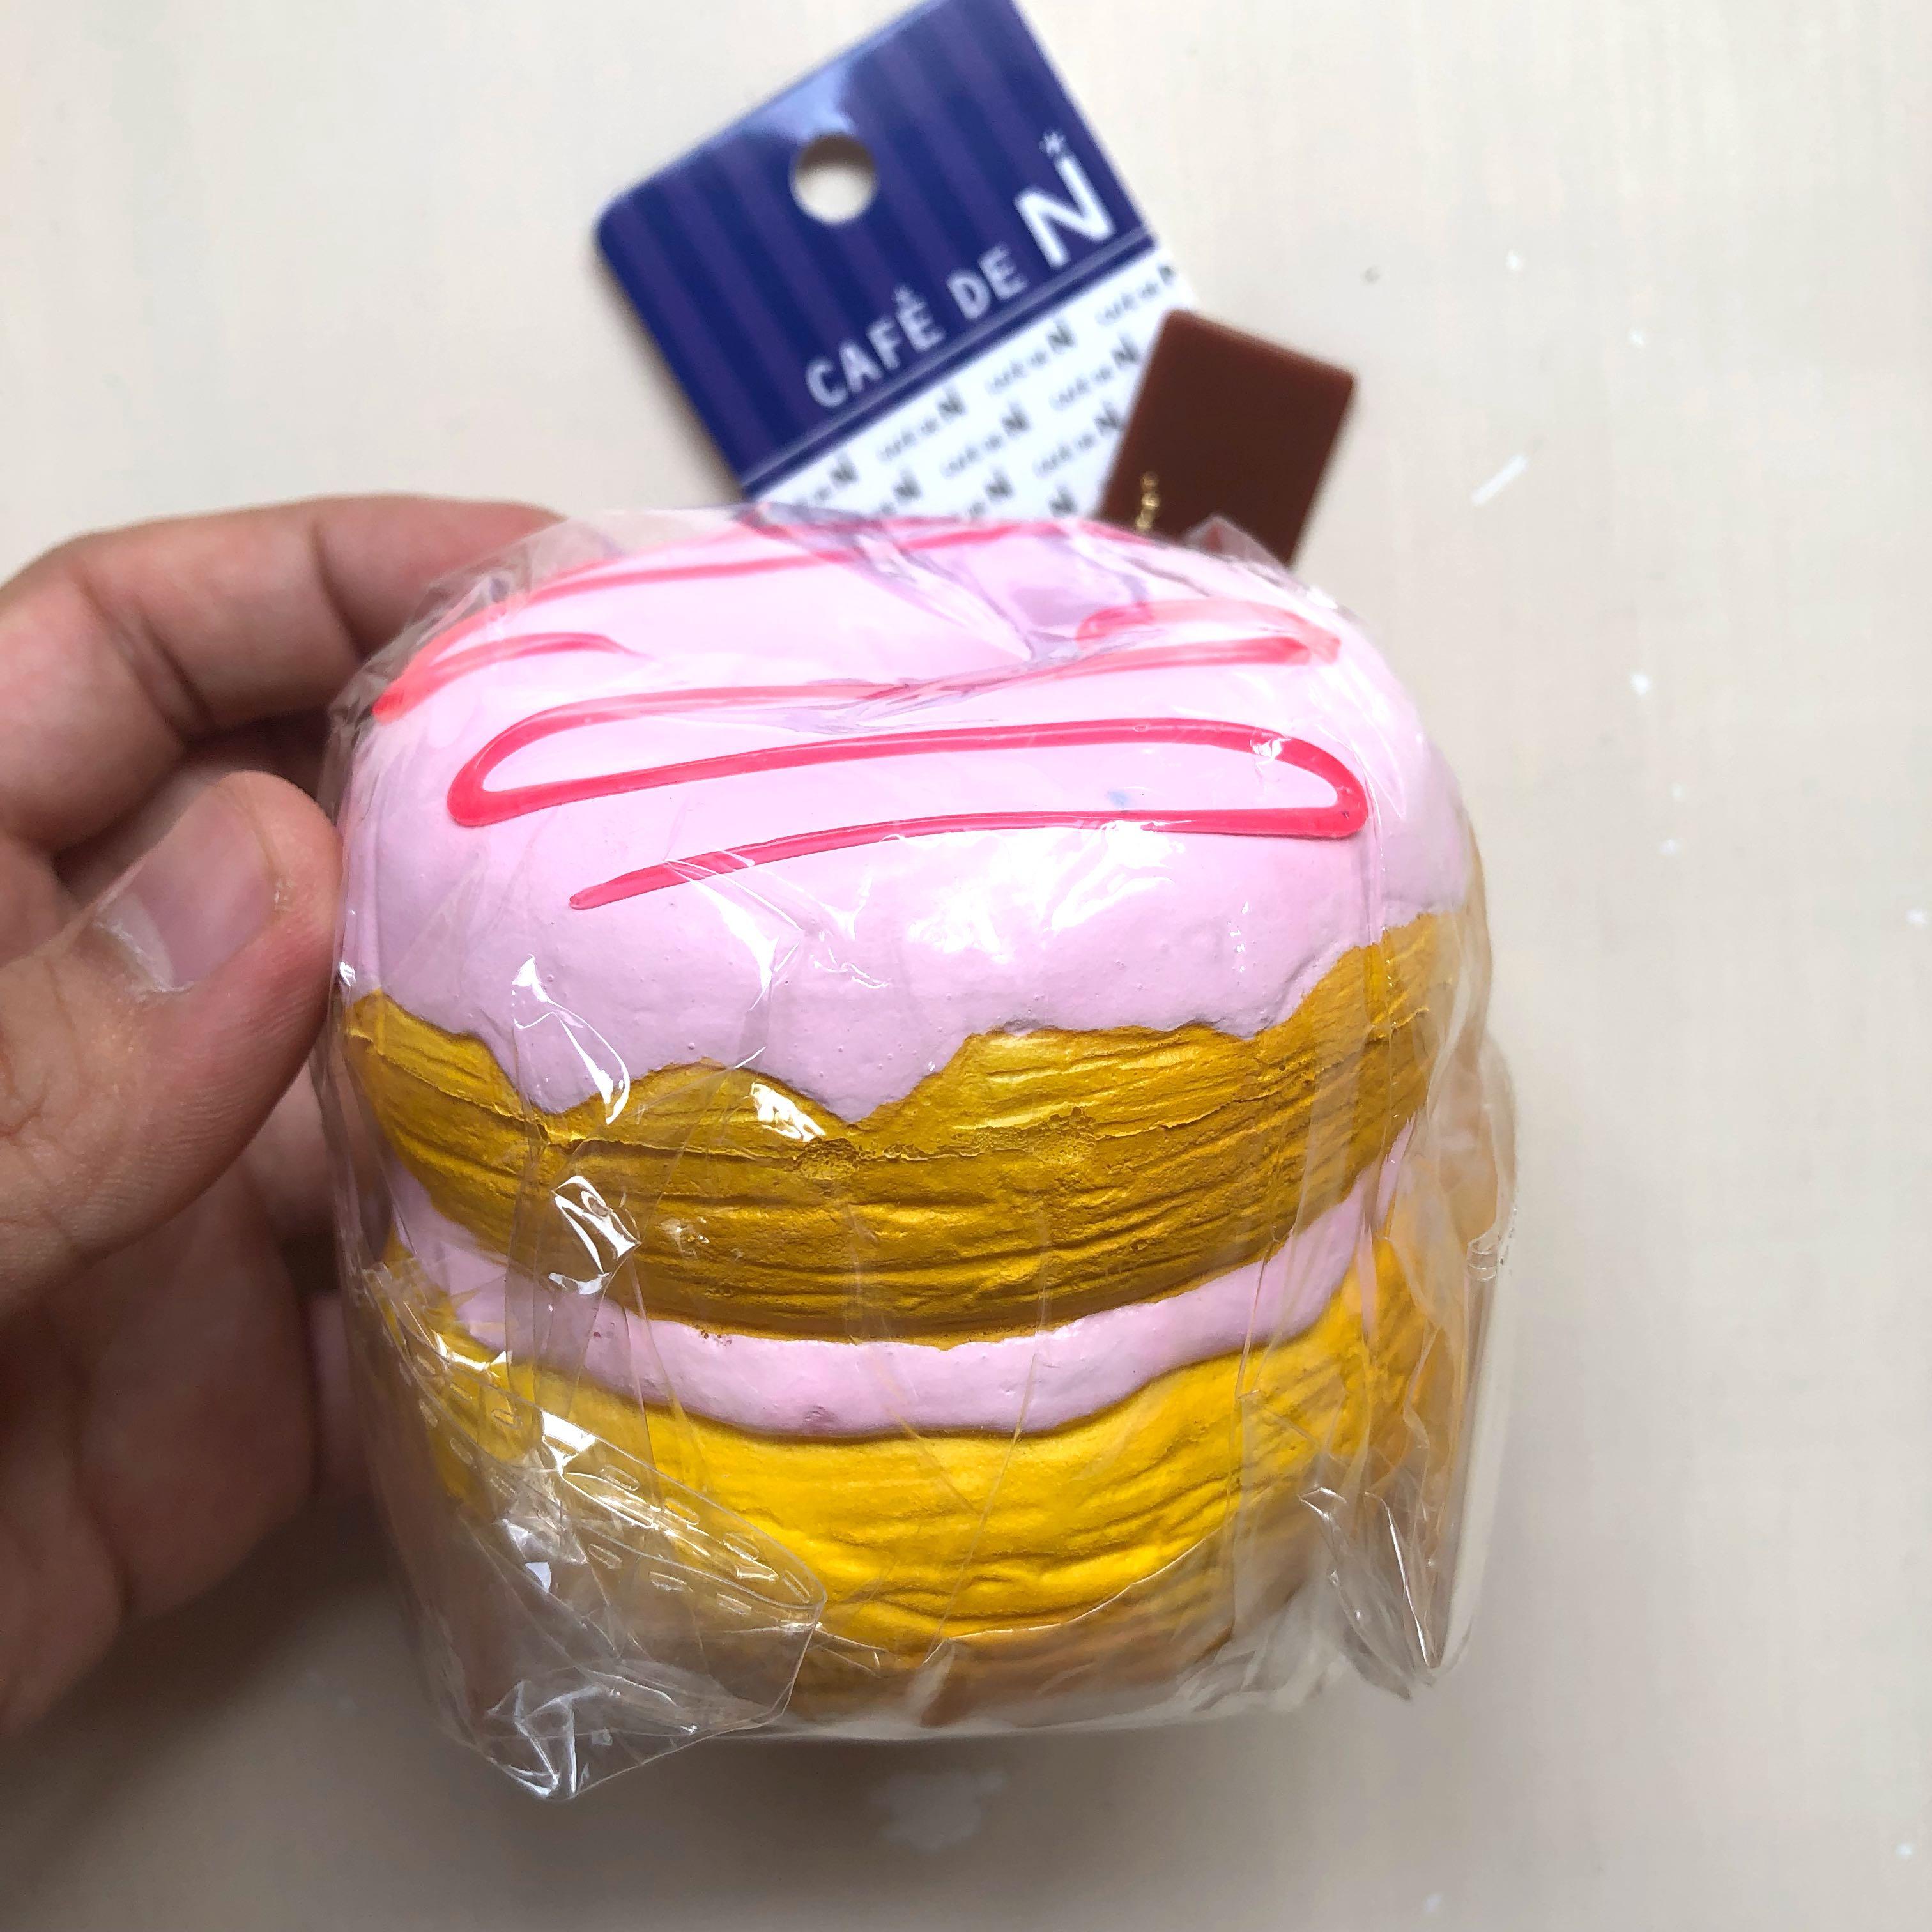 Cafe De N Donut Sandwich Squishy Hobbies Toys Toys Games On Carousell